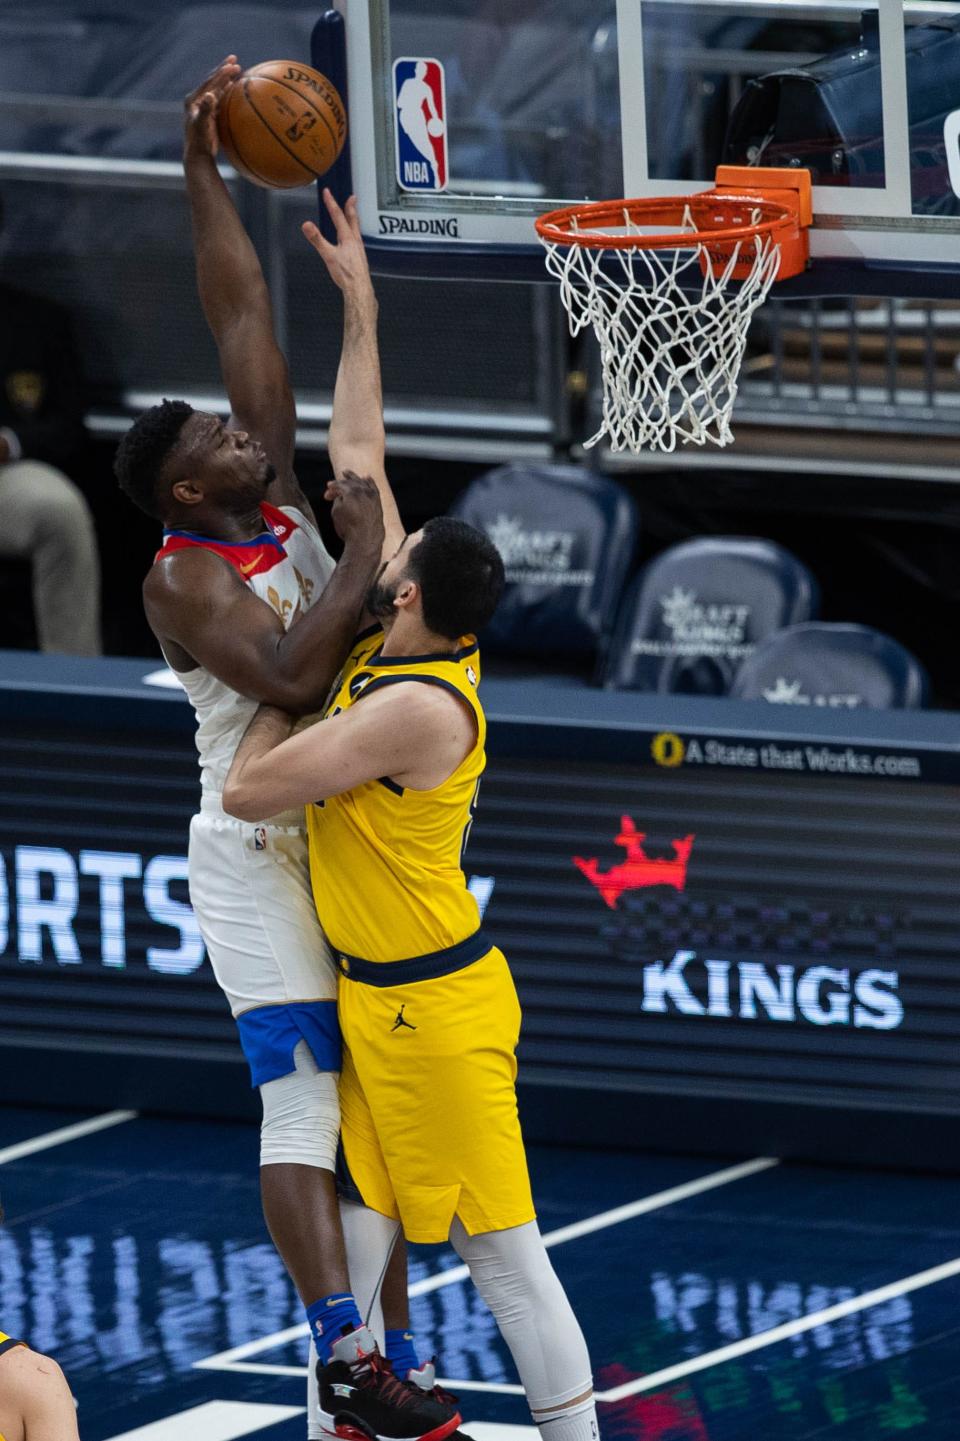 Feb 5, 2021; Indianapolis, Indiana, USA; New Orleans Pelicans forward Zion Williamson (1) shoots the ball over Indiana Pacers center Goga Bitadze (88) in the second quarter at Bankers Life Fieldhouse. Mandatory Credit: Trevor Ruszkowski-USA TODAY Sports